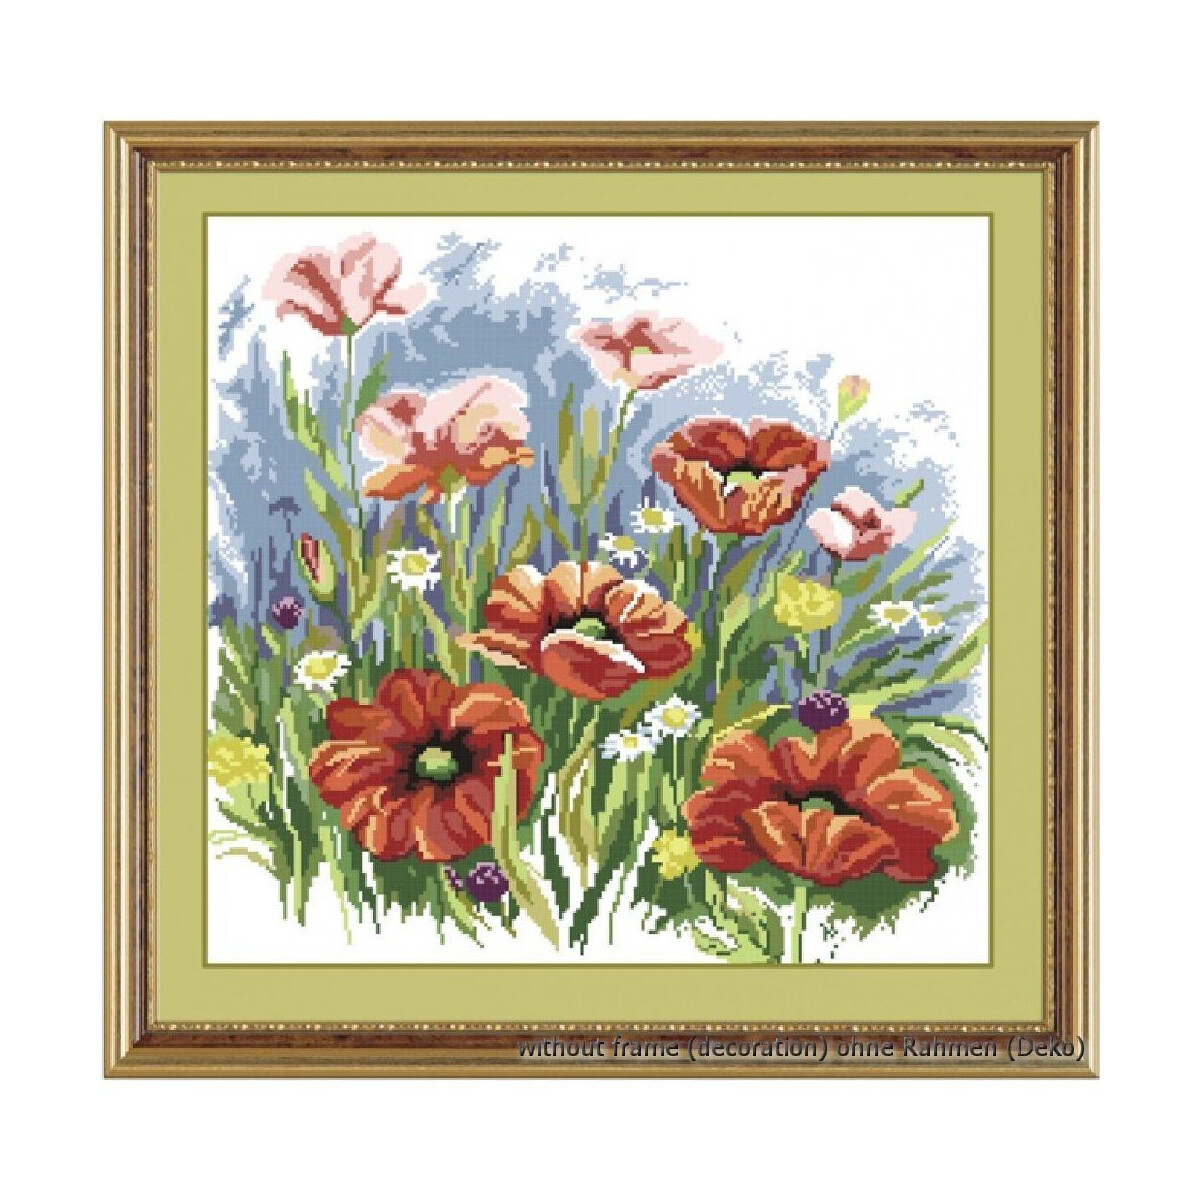 Oven counted cross stitch kit "Red poppies",...